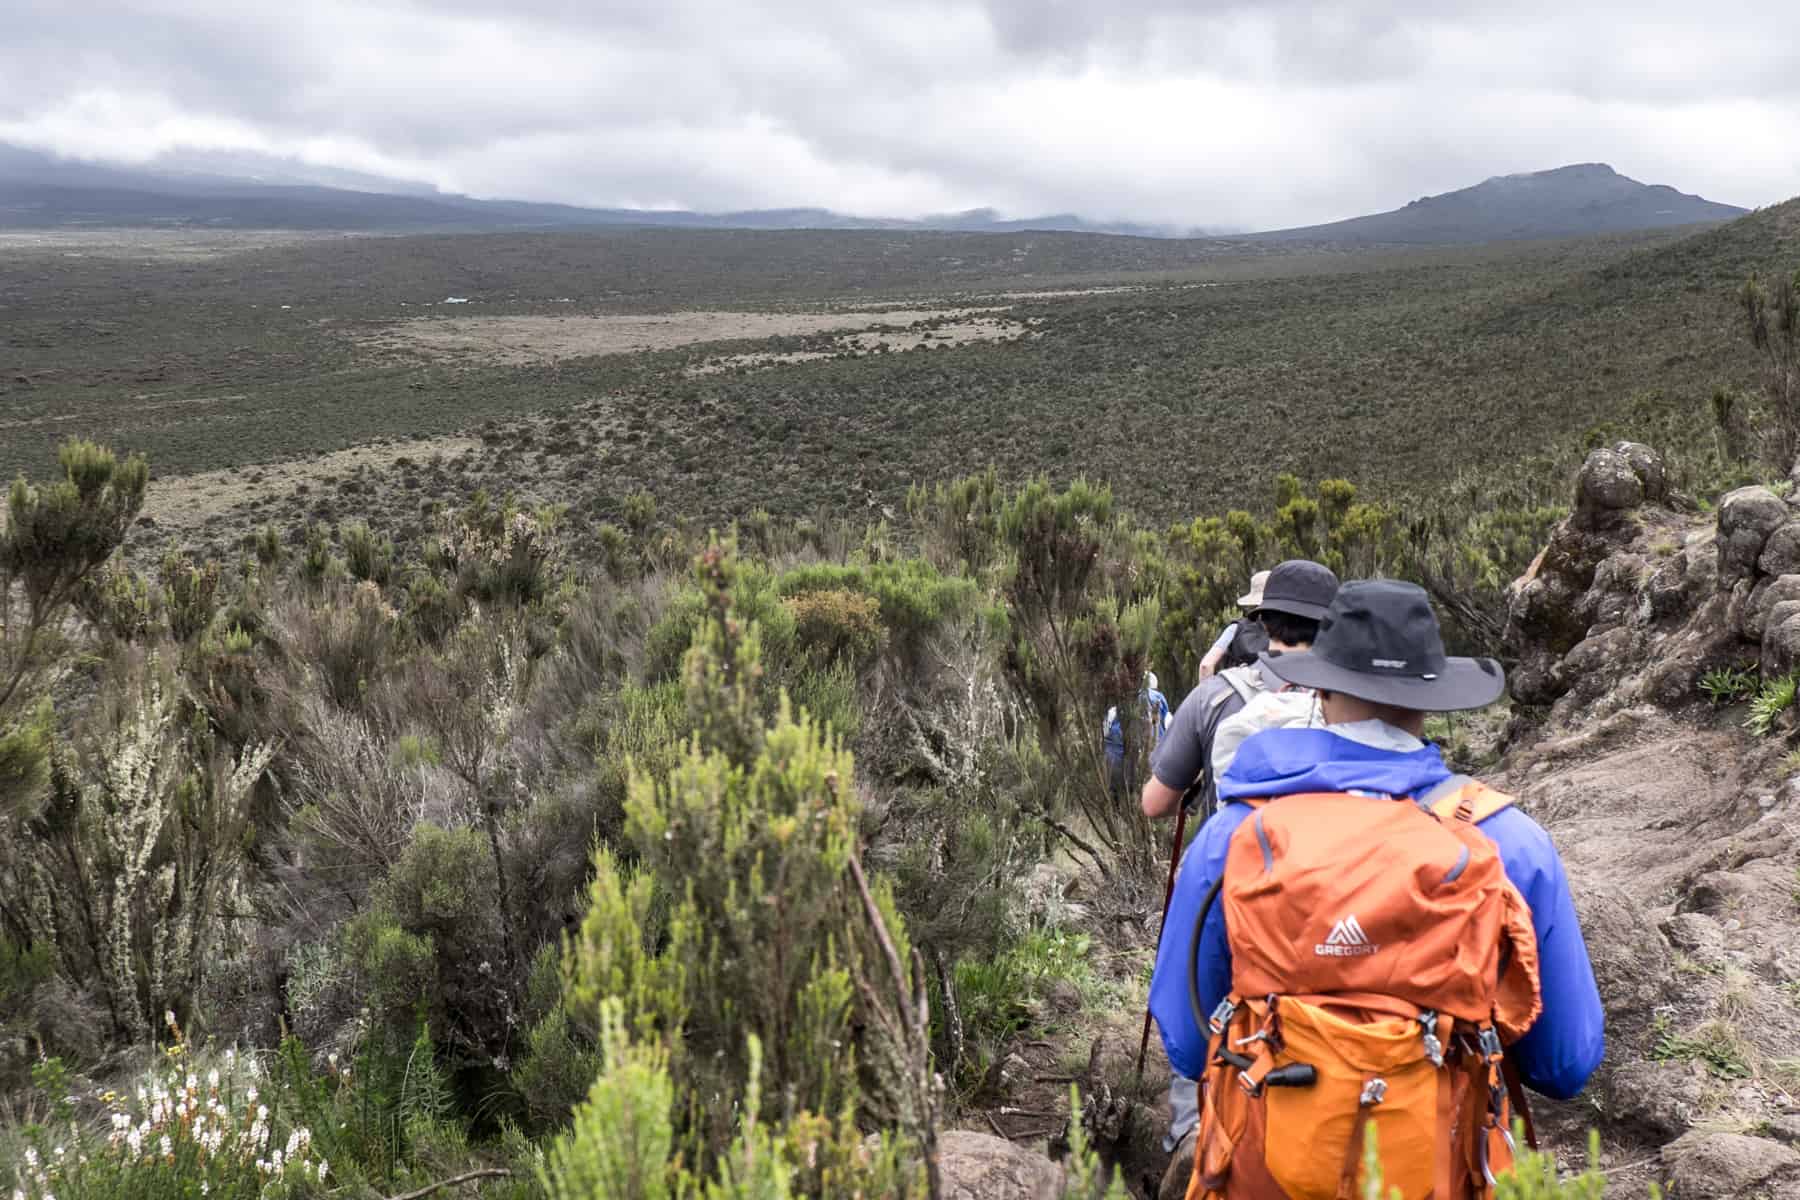 Four trekkers makes there way down a hill through the dry, grassy vegetation in the Moorland Zone of the Kilimanjaro trekking trail.